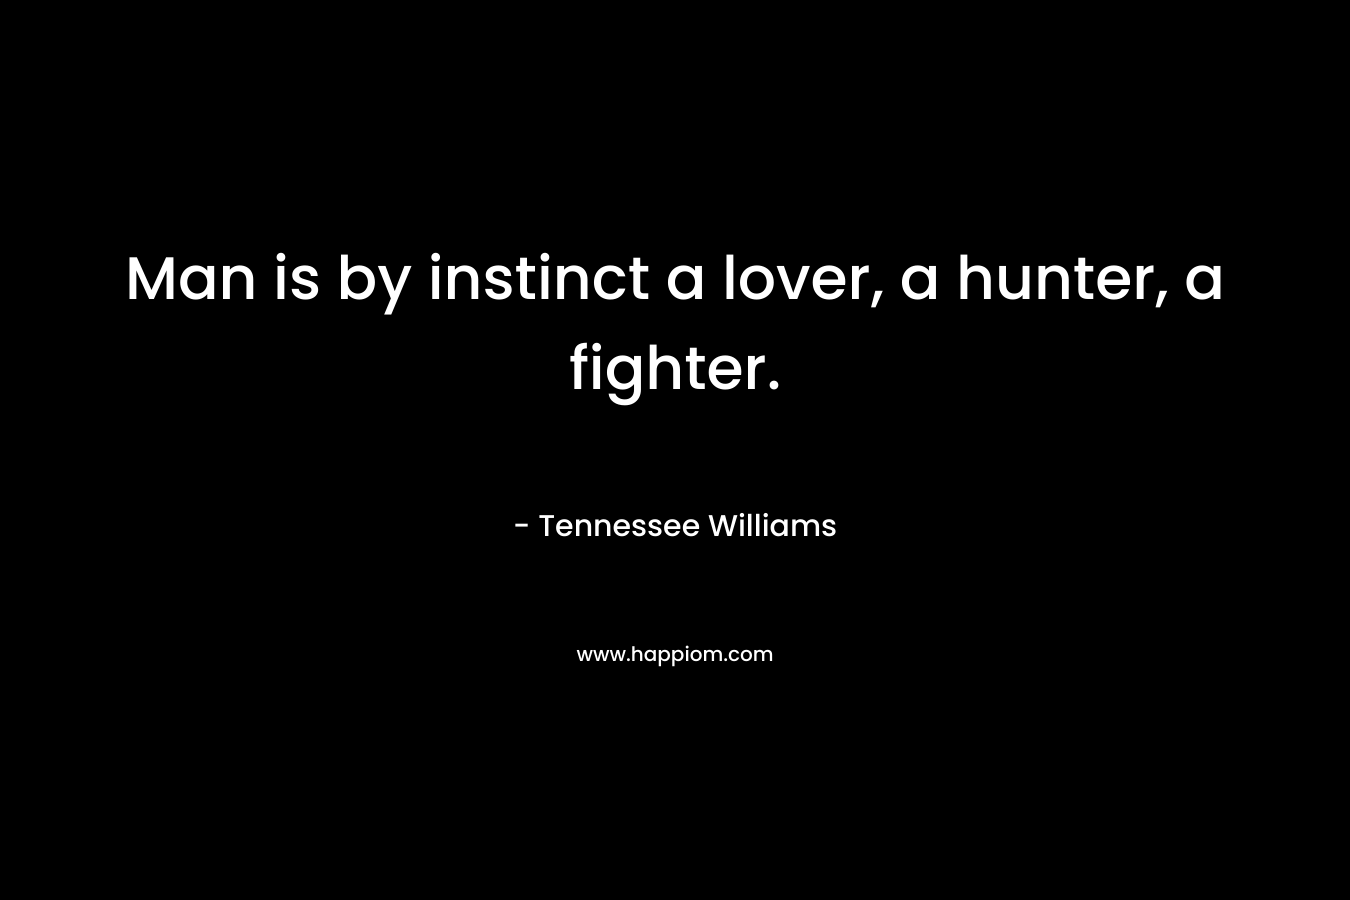 Man is by instinct a lover, a hunter, a fighter. – Tennessee Williams